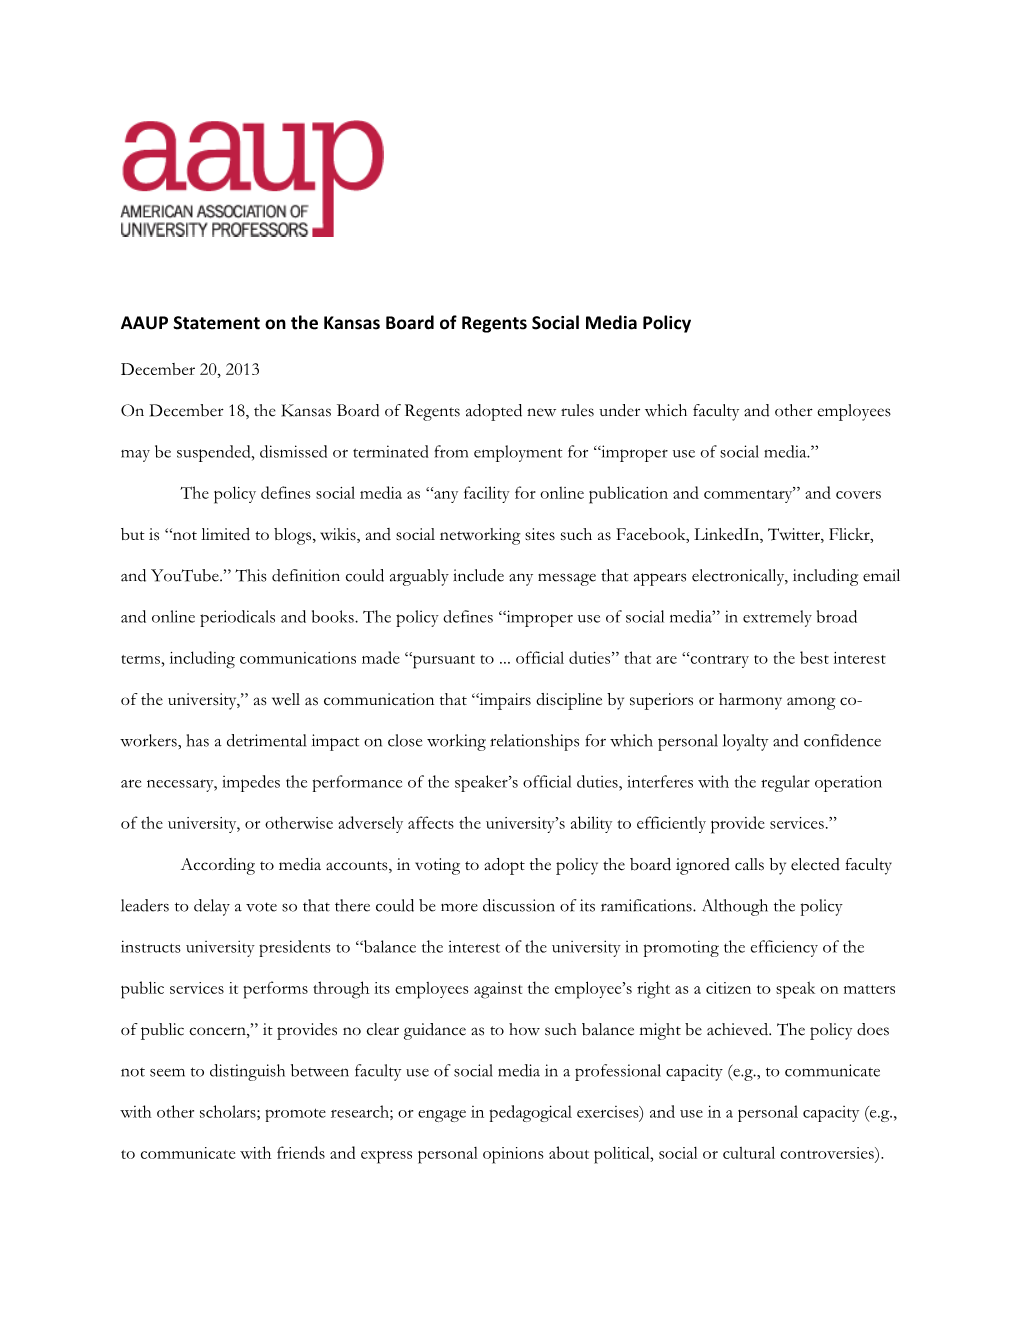 AAUP Statement on the Kansas Board of Regents Social Media Policy